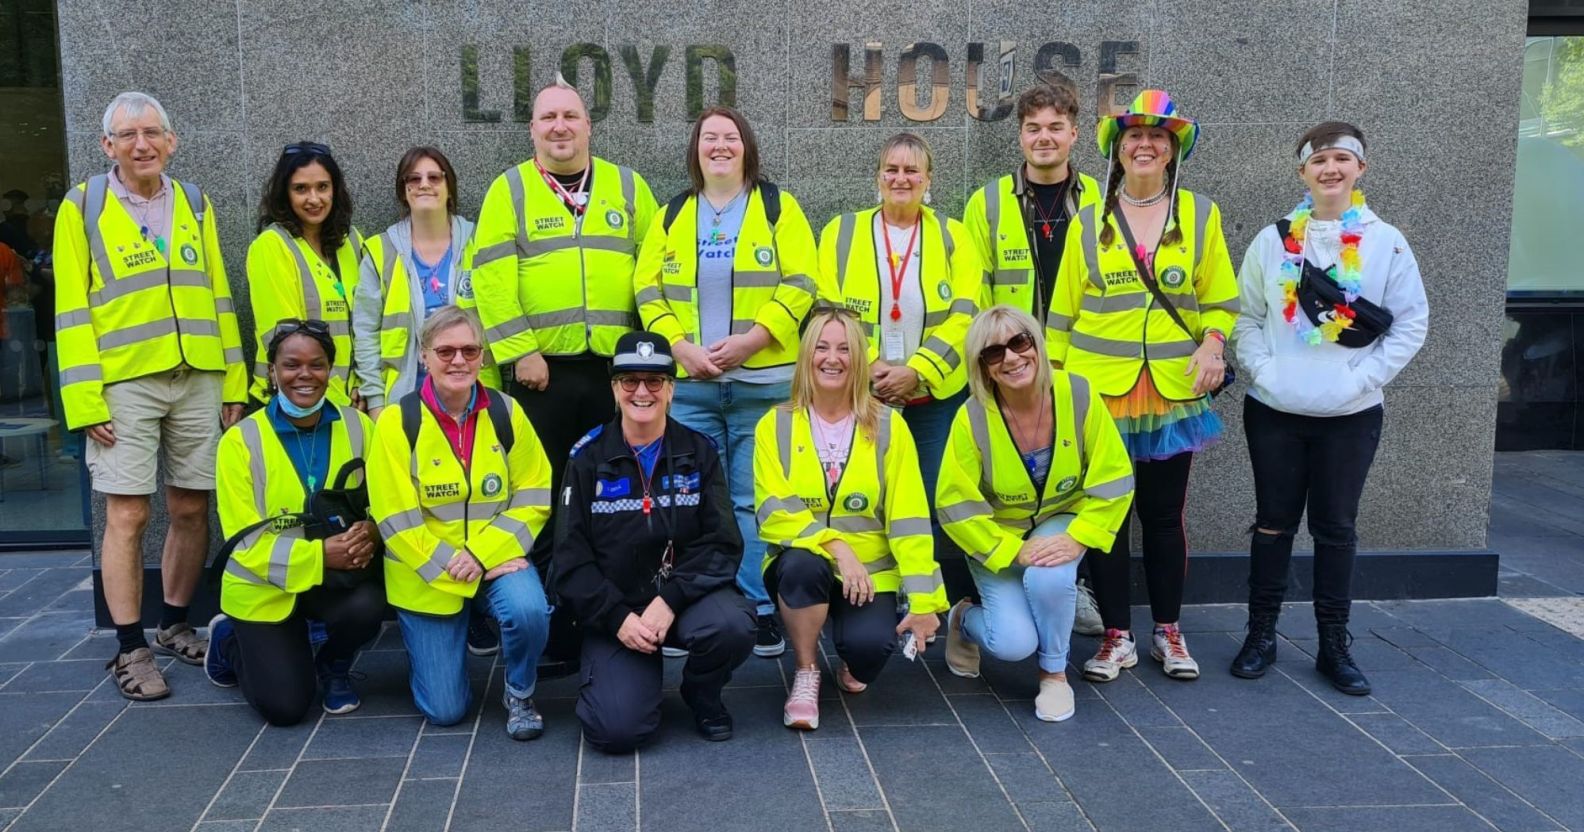 Members of the Birmingham StreetWatch crew wear yellow high-vis jackets, smiling in front of the police headquarters.